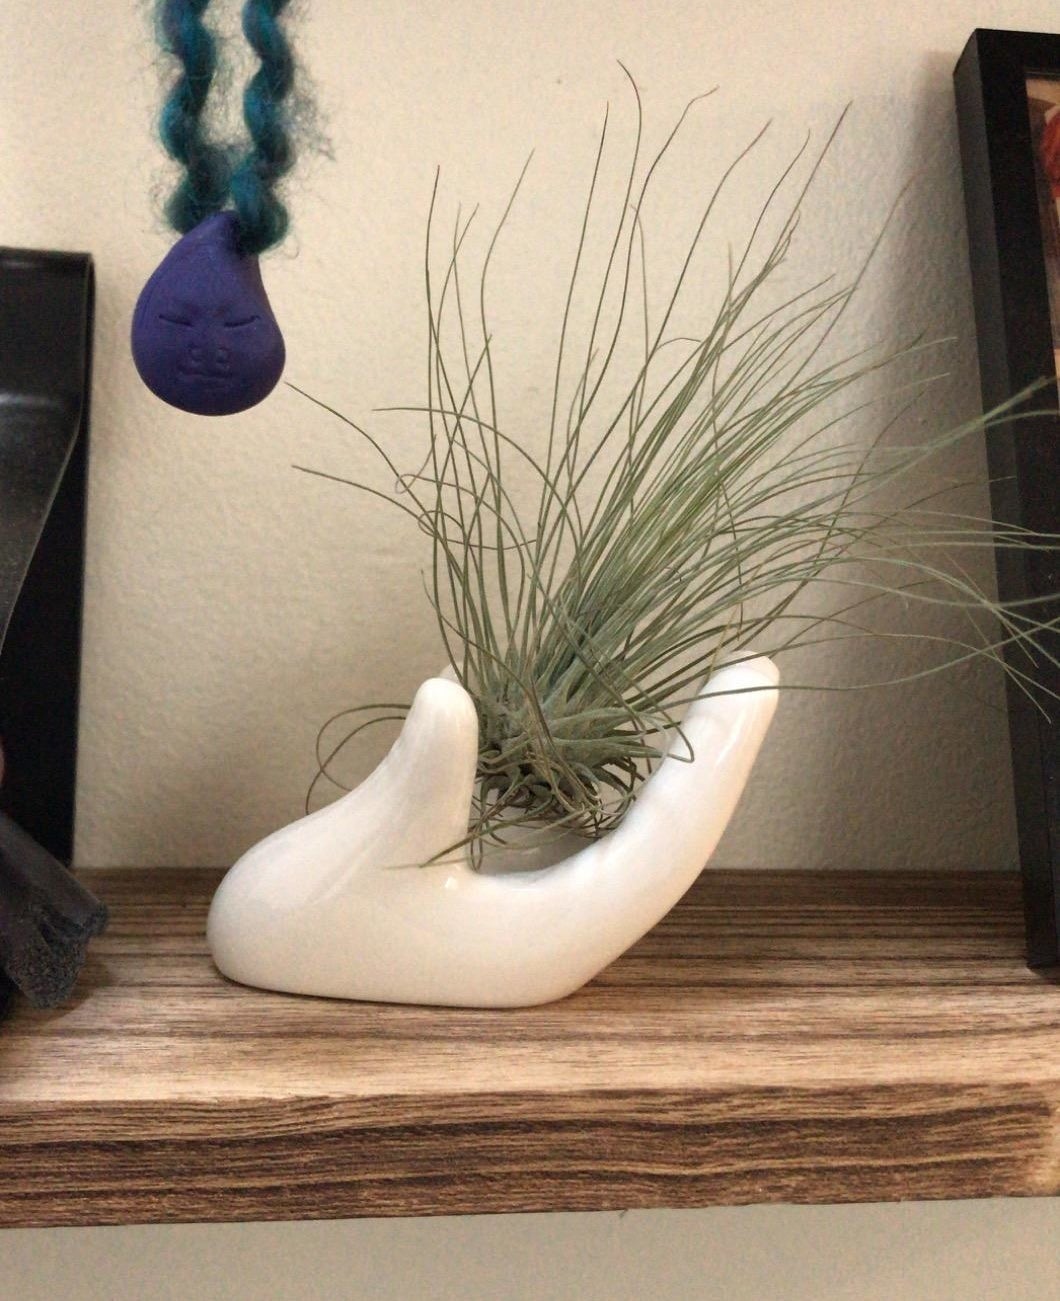 The hand-shaped plant holder holding an air plant